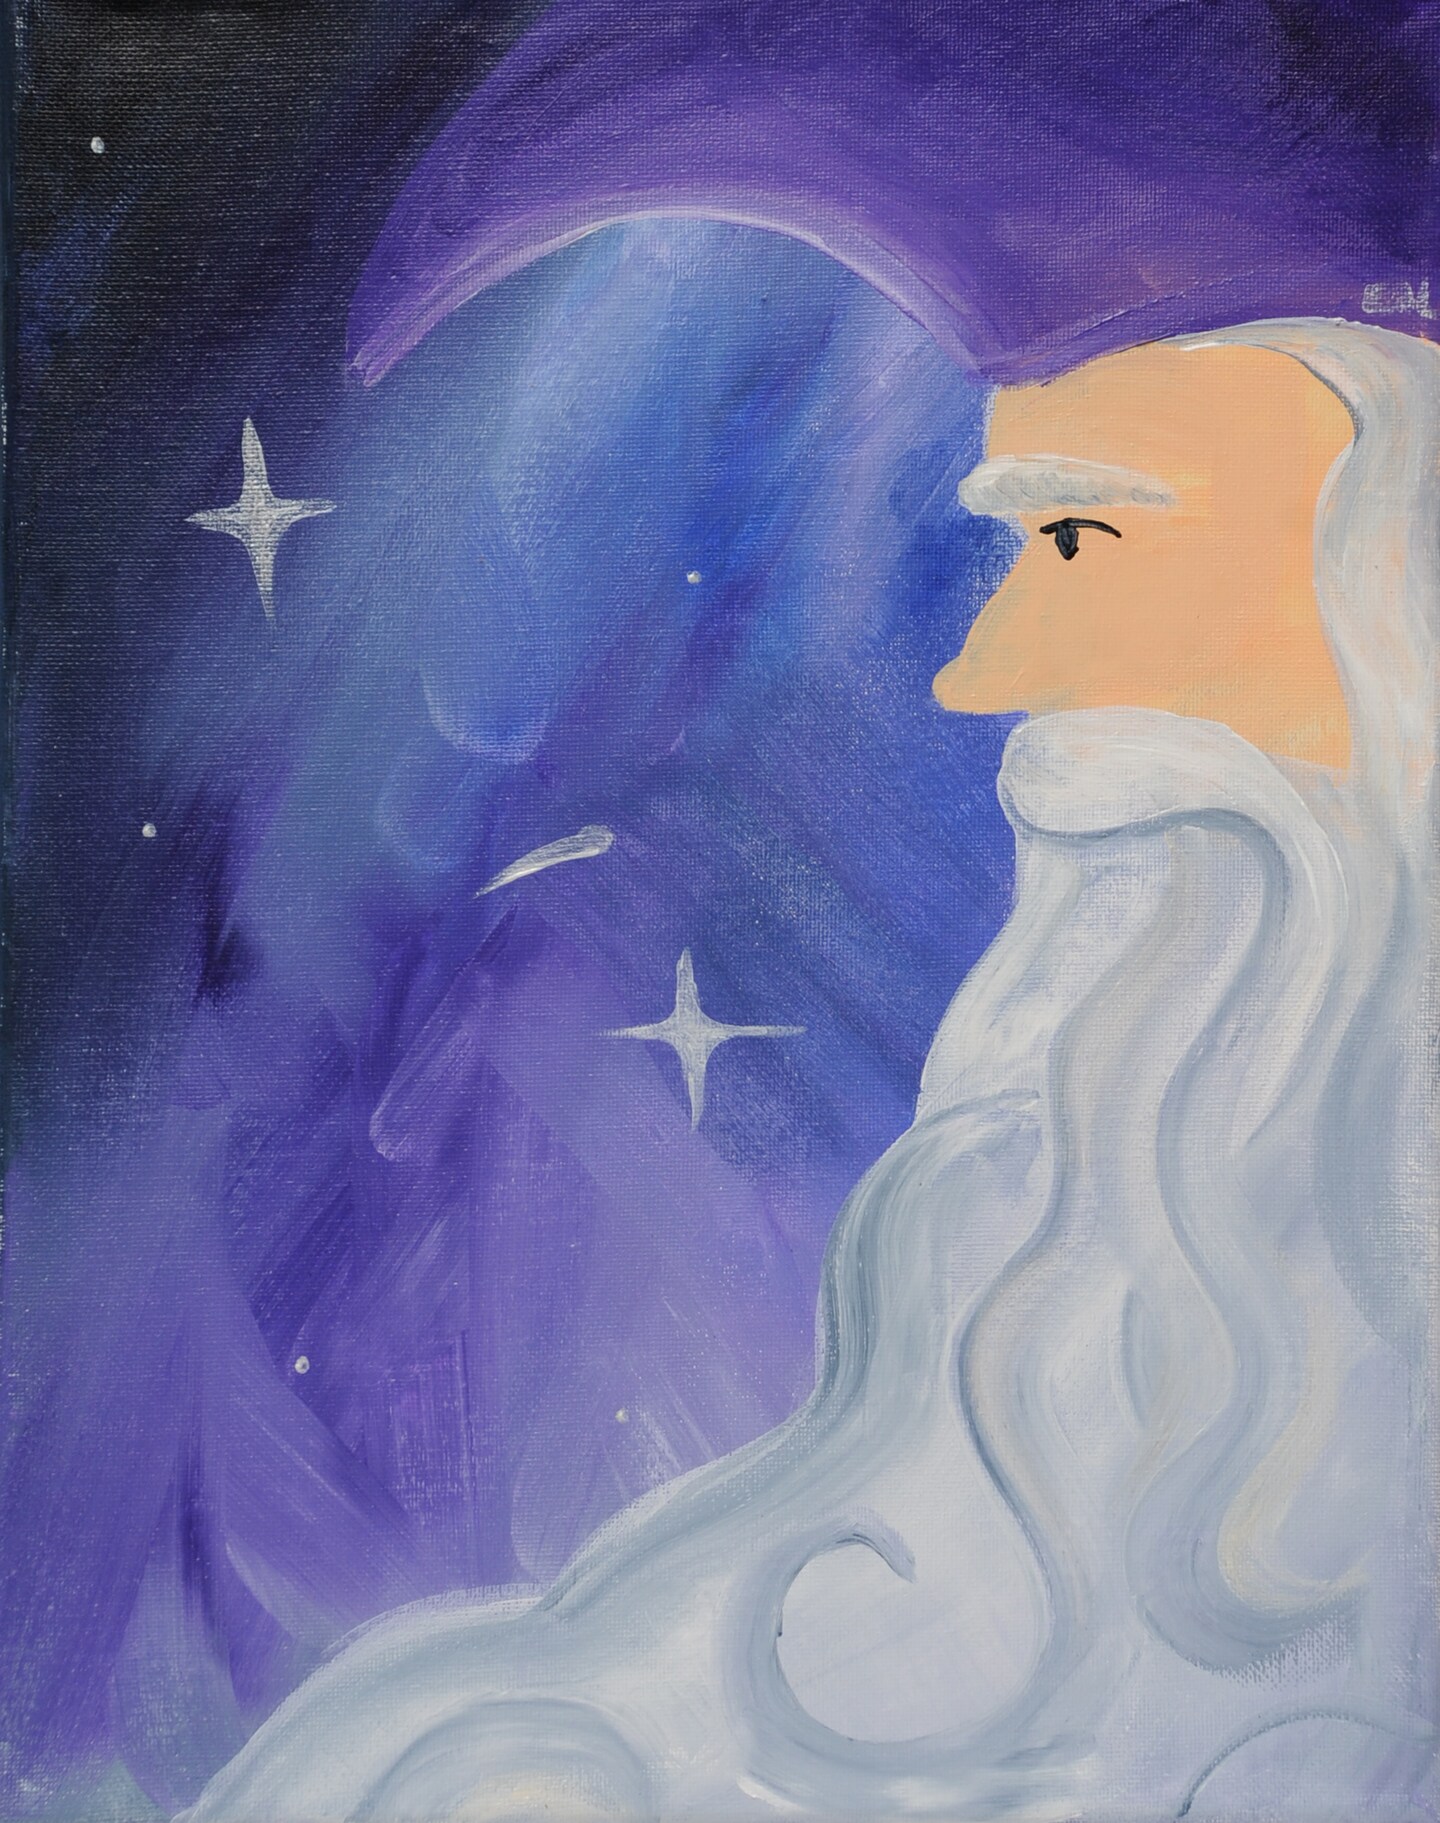 Paint Kit - Merlin&#x27;s Wizardry Acrylic Painting Kit &#x26; Video Lesson - Paint &#x26; Sip At Home - Paint Party